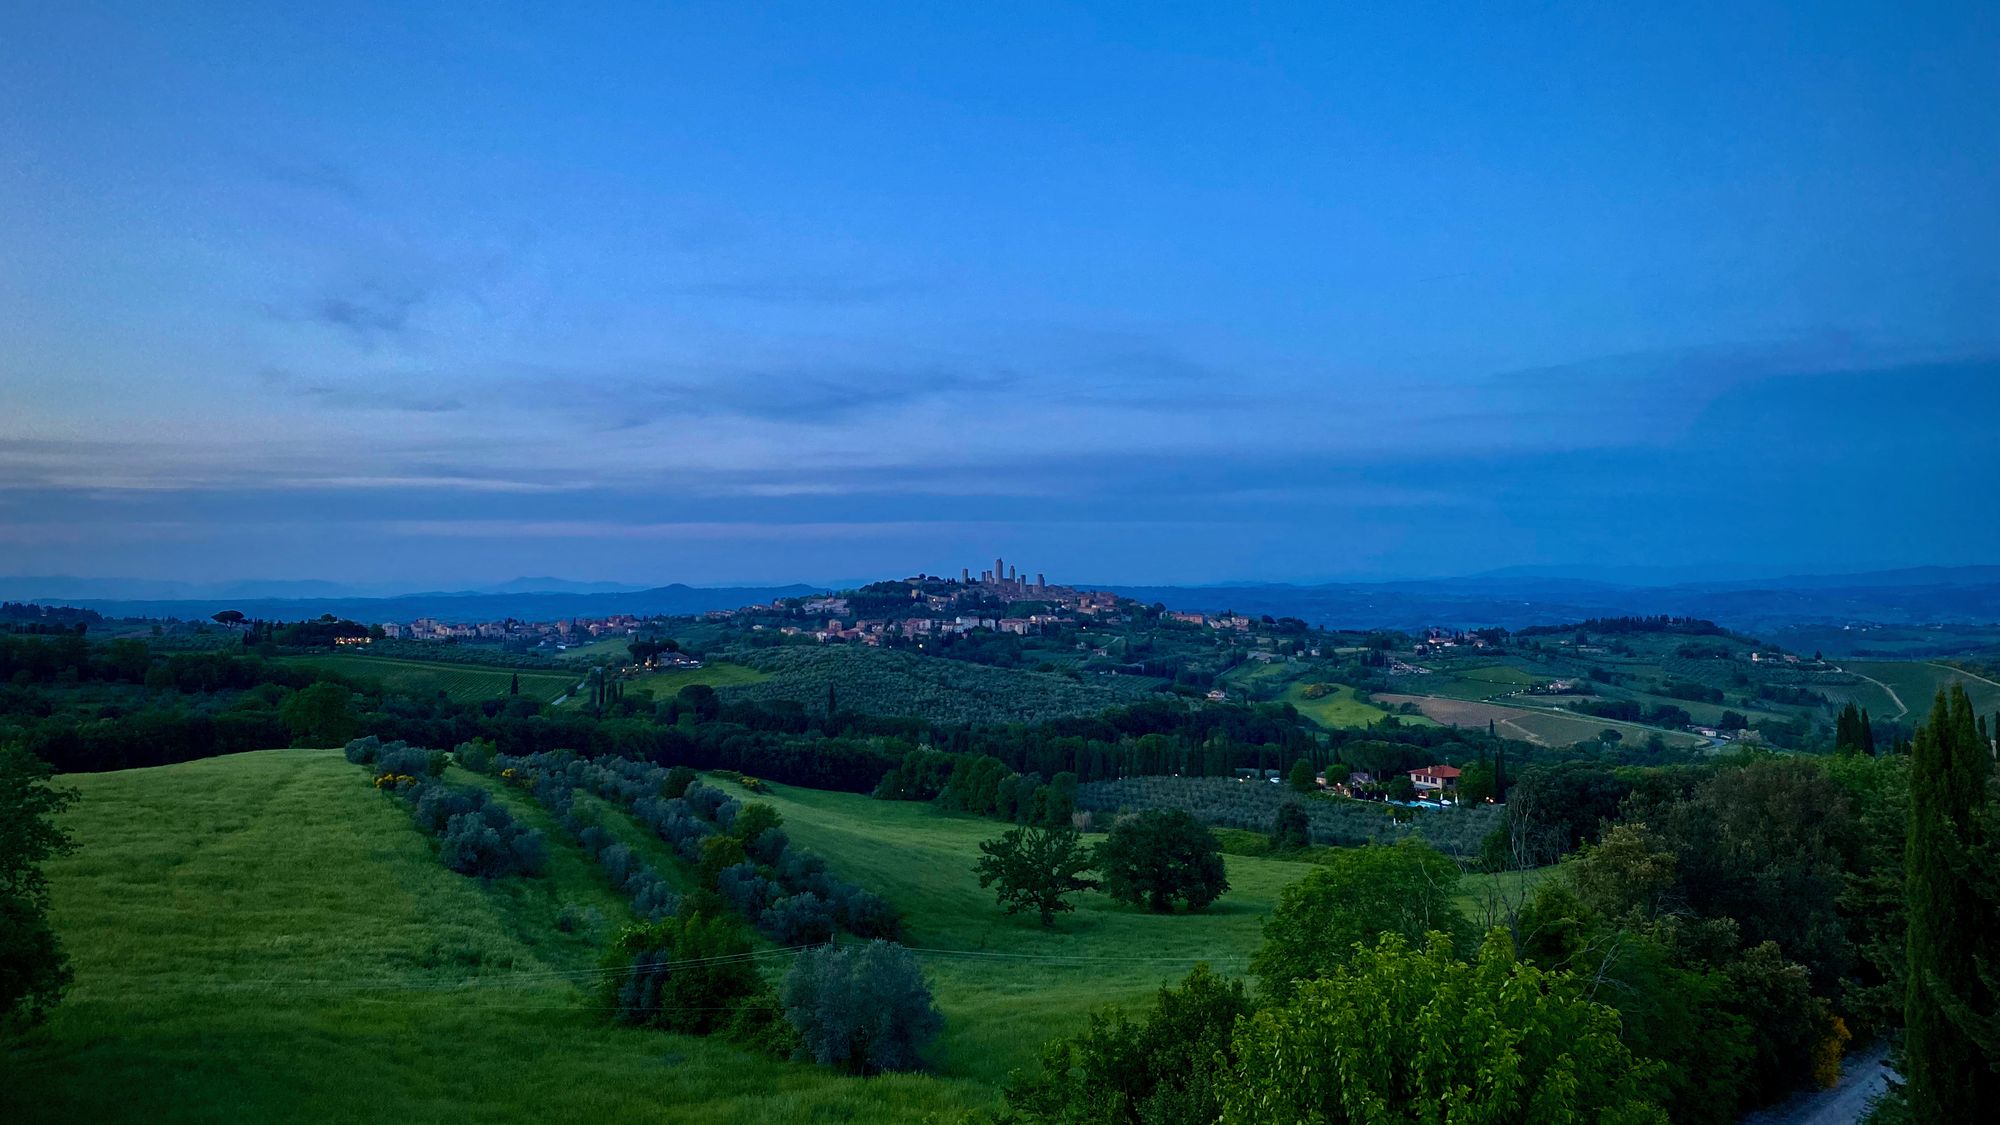 View over San Gimignano and surrounding area after sundown